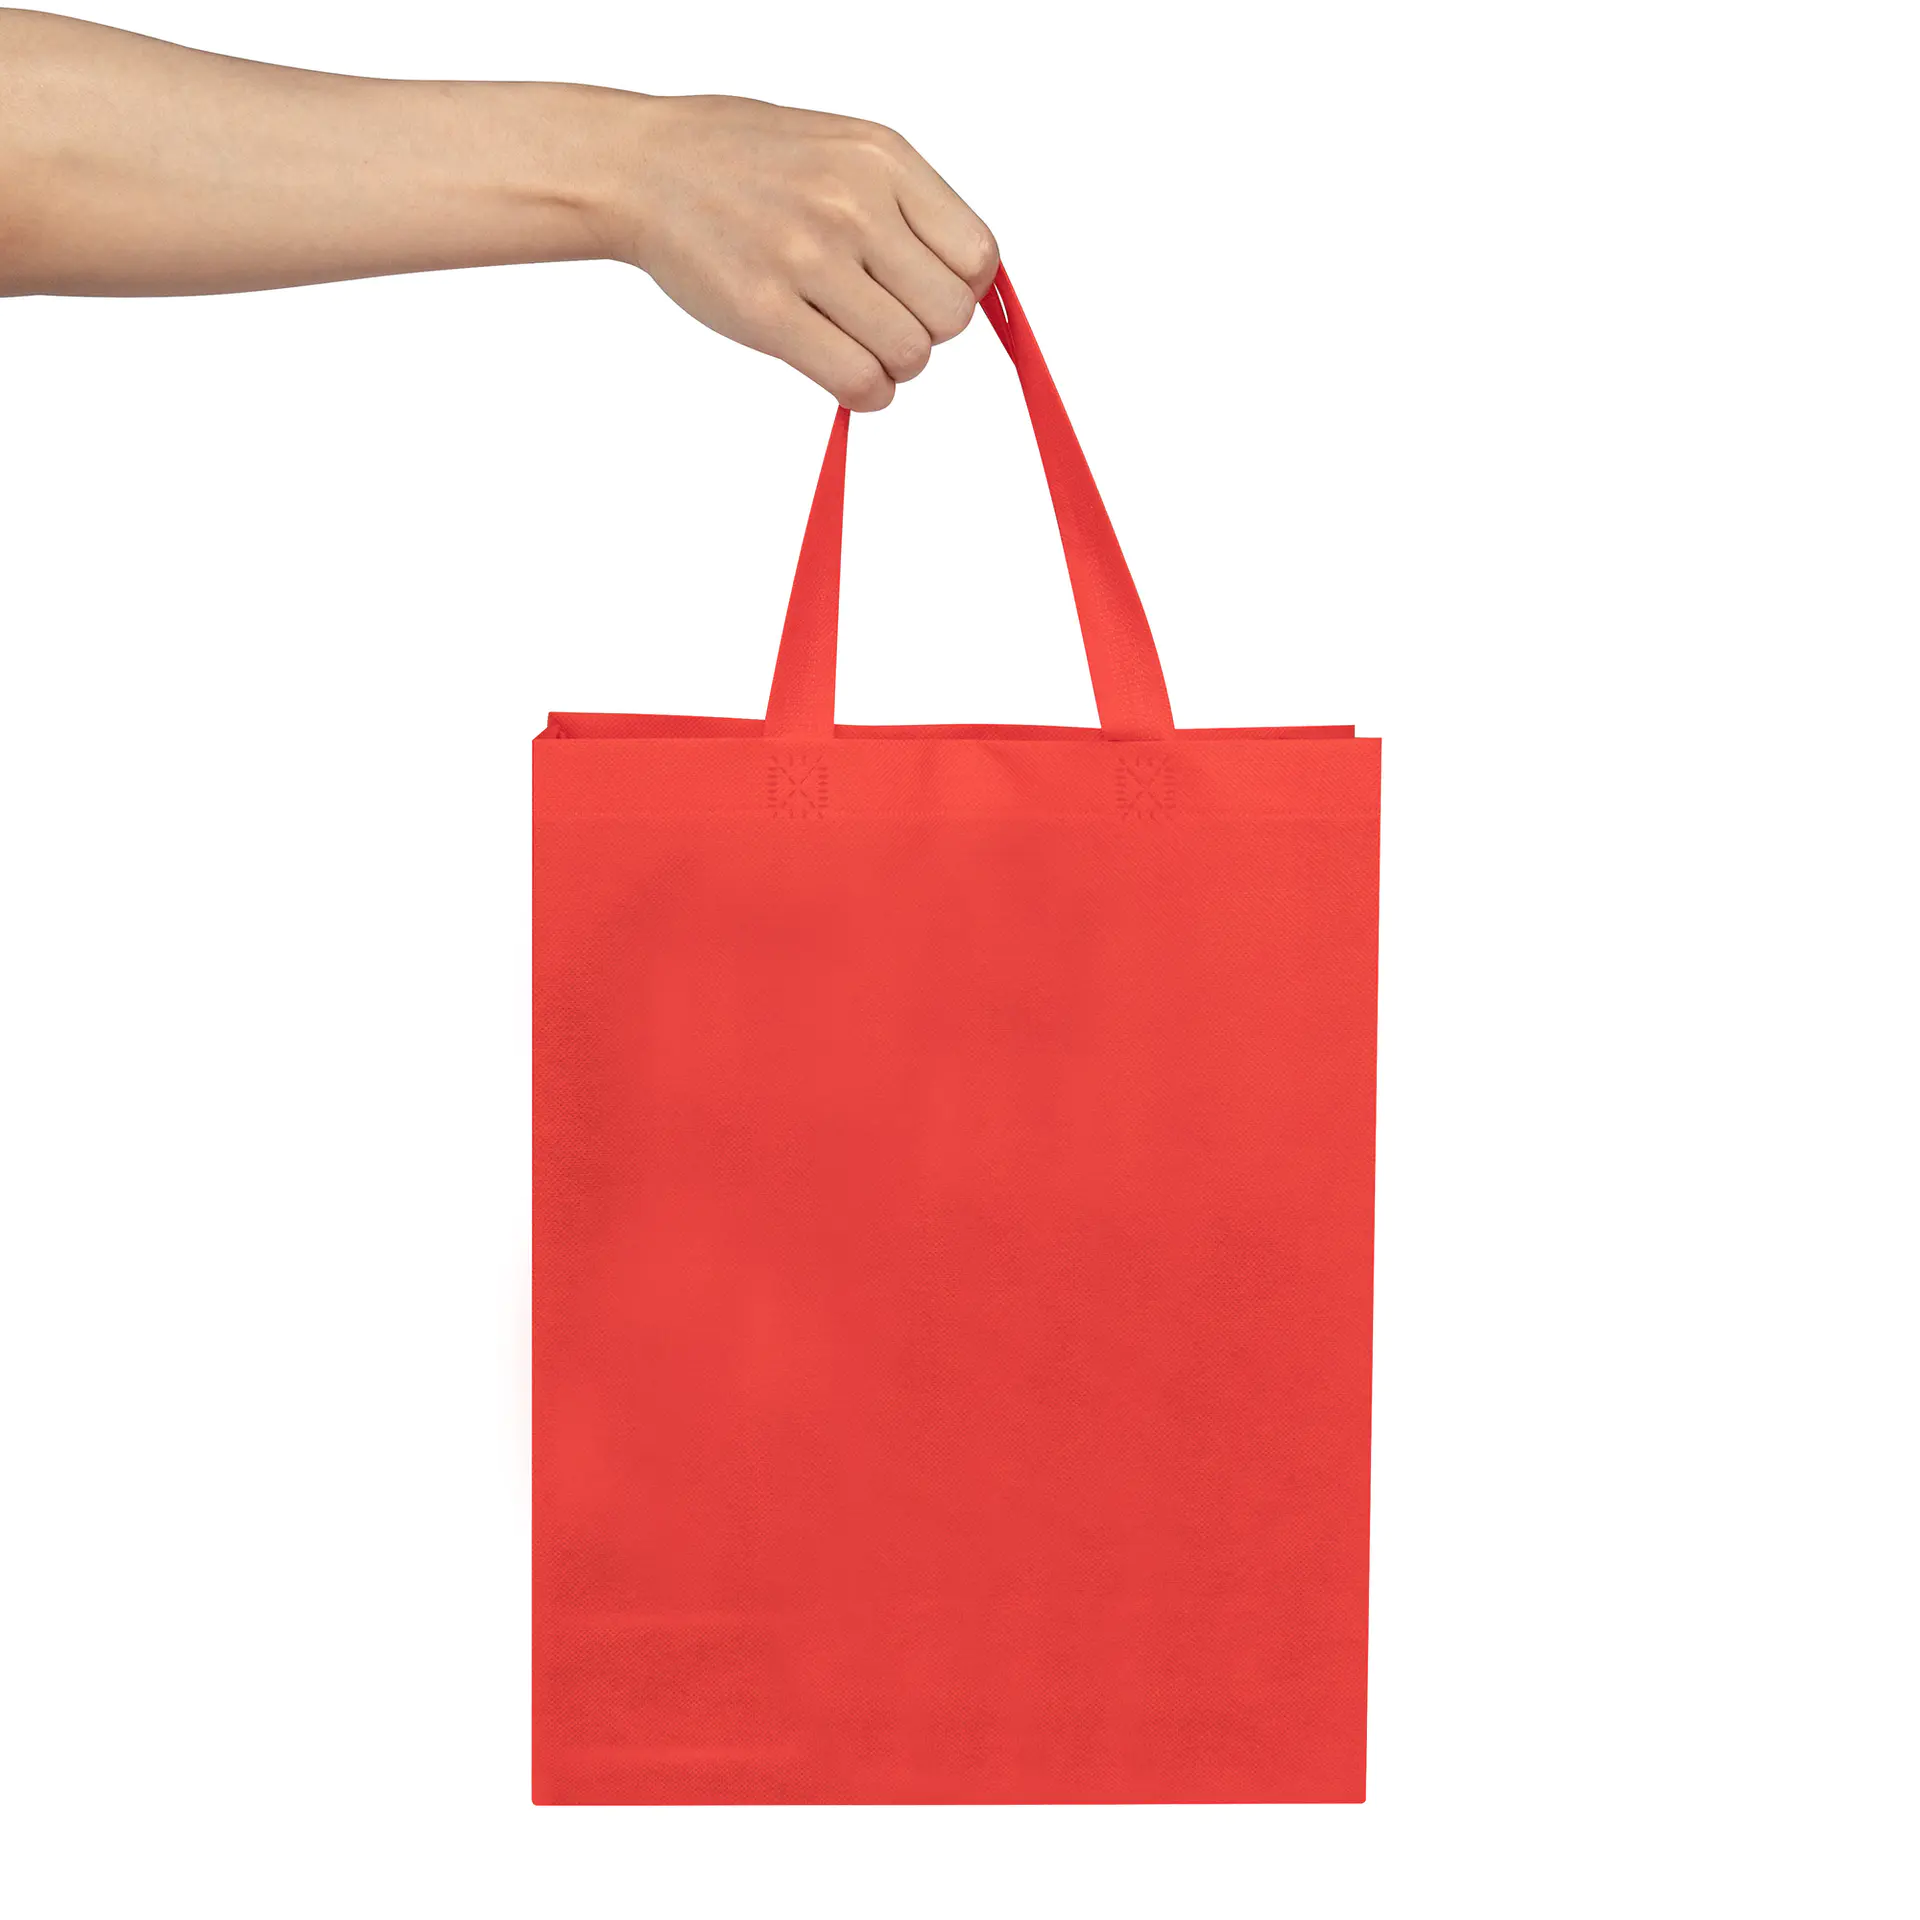 China supplier high quality 100% pp nonwoven fabric handle bag in various color